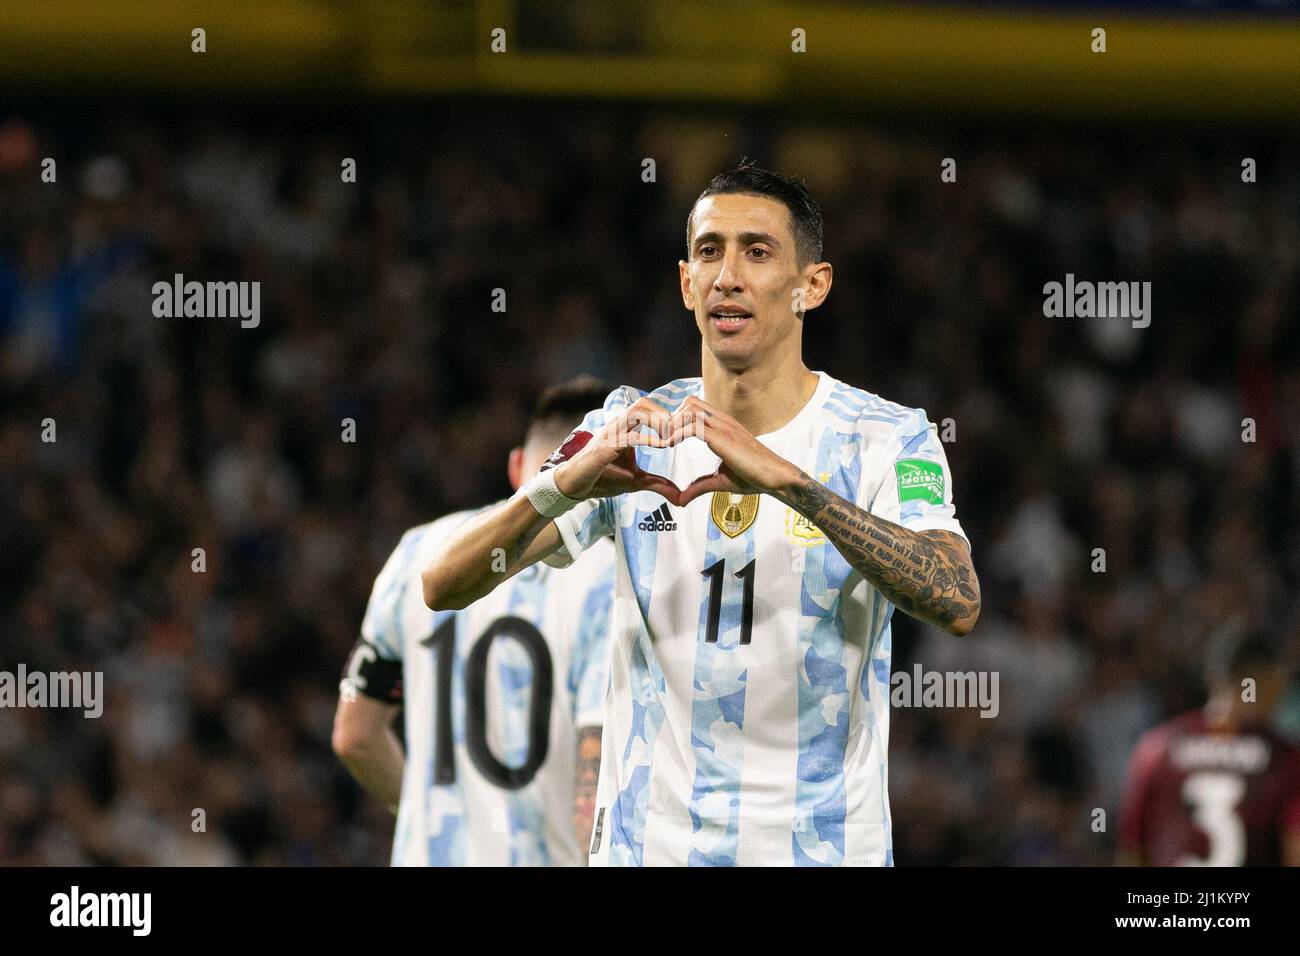 BUENOS AIRES, ARGENTINA - MARCH 25: Ángel Di María of Argentina celebrates after scoring a goal during the Fifa World Cup Qualifiers - Conmebol match between Argentina and Venezuela at La Bombonera Stadium on March 25, 2022 in Buenos Aires, Argentina. (Photo by Florencia Tan Jun/Pximages) Stock Photo